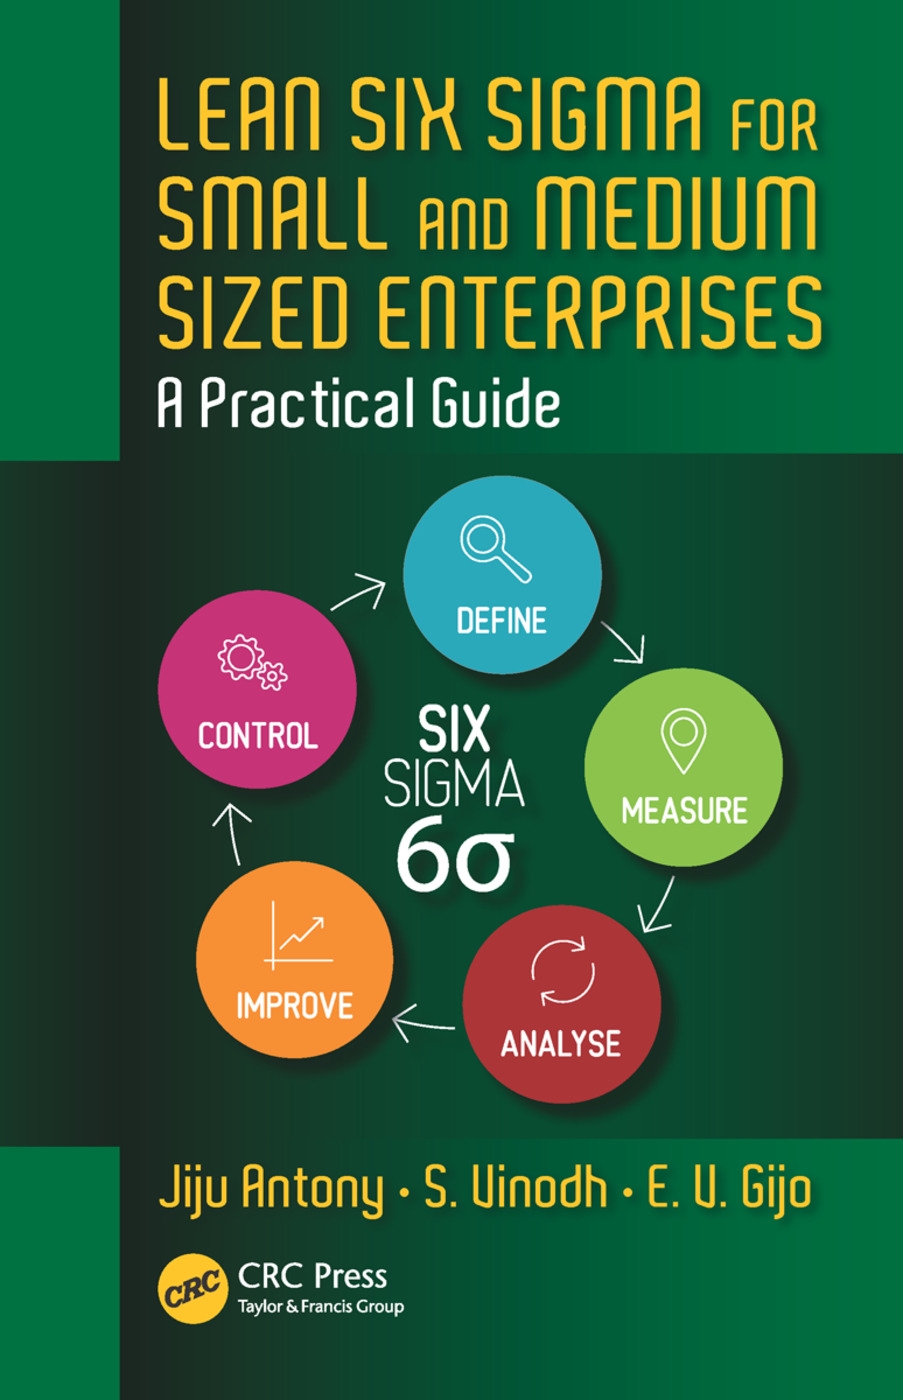 Lean Six SIGMA for Small and Medium Sized Enterprises: A Practical Guide